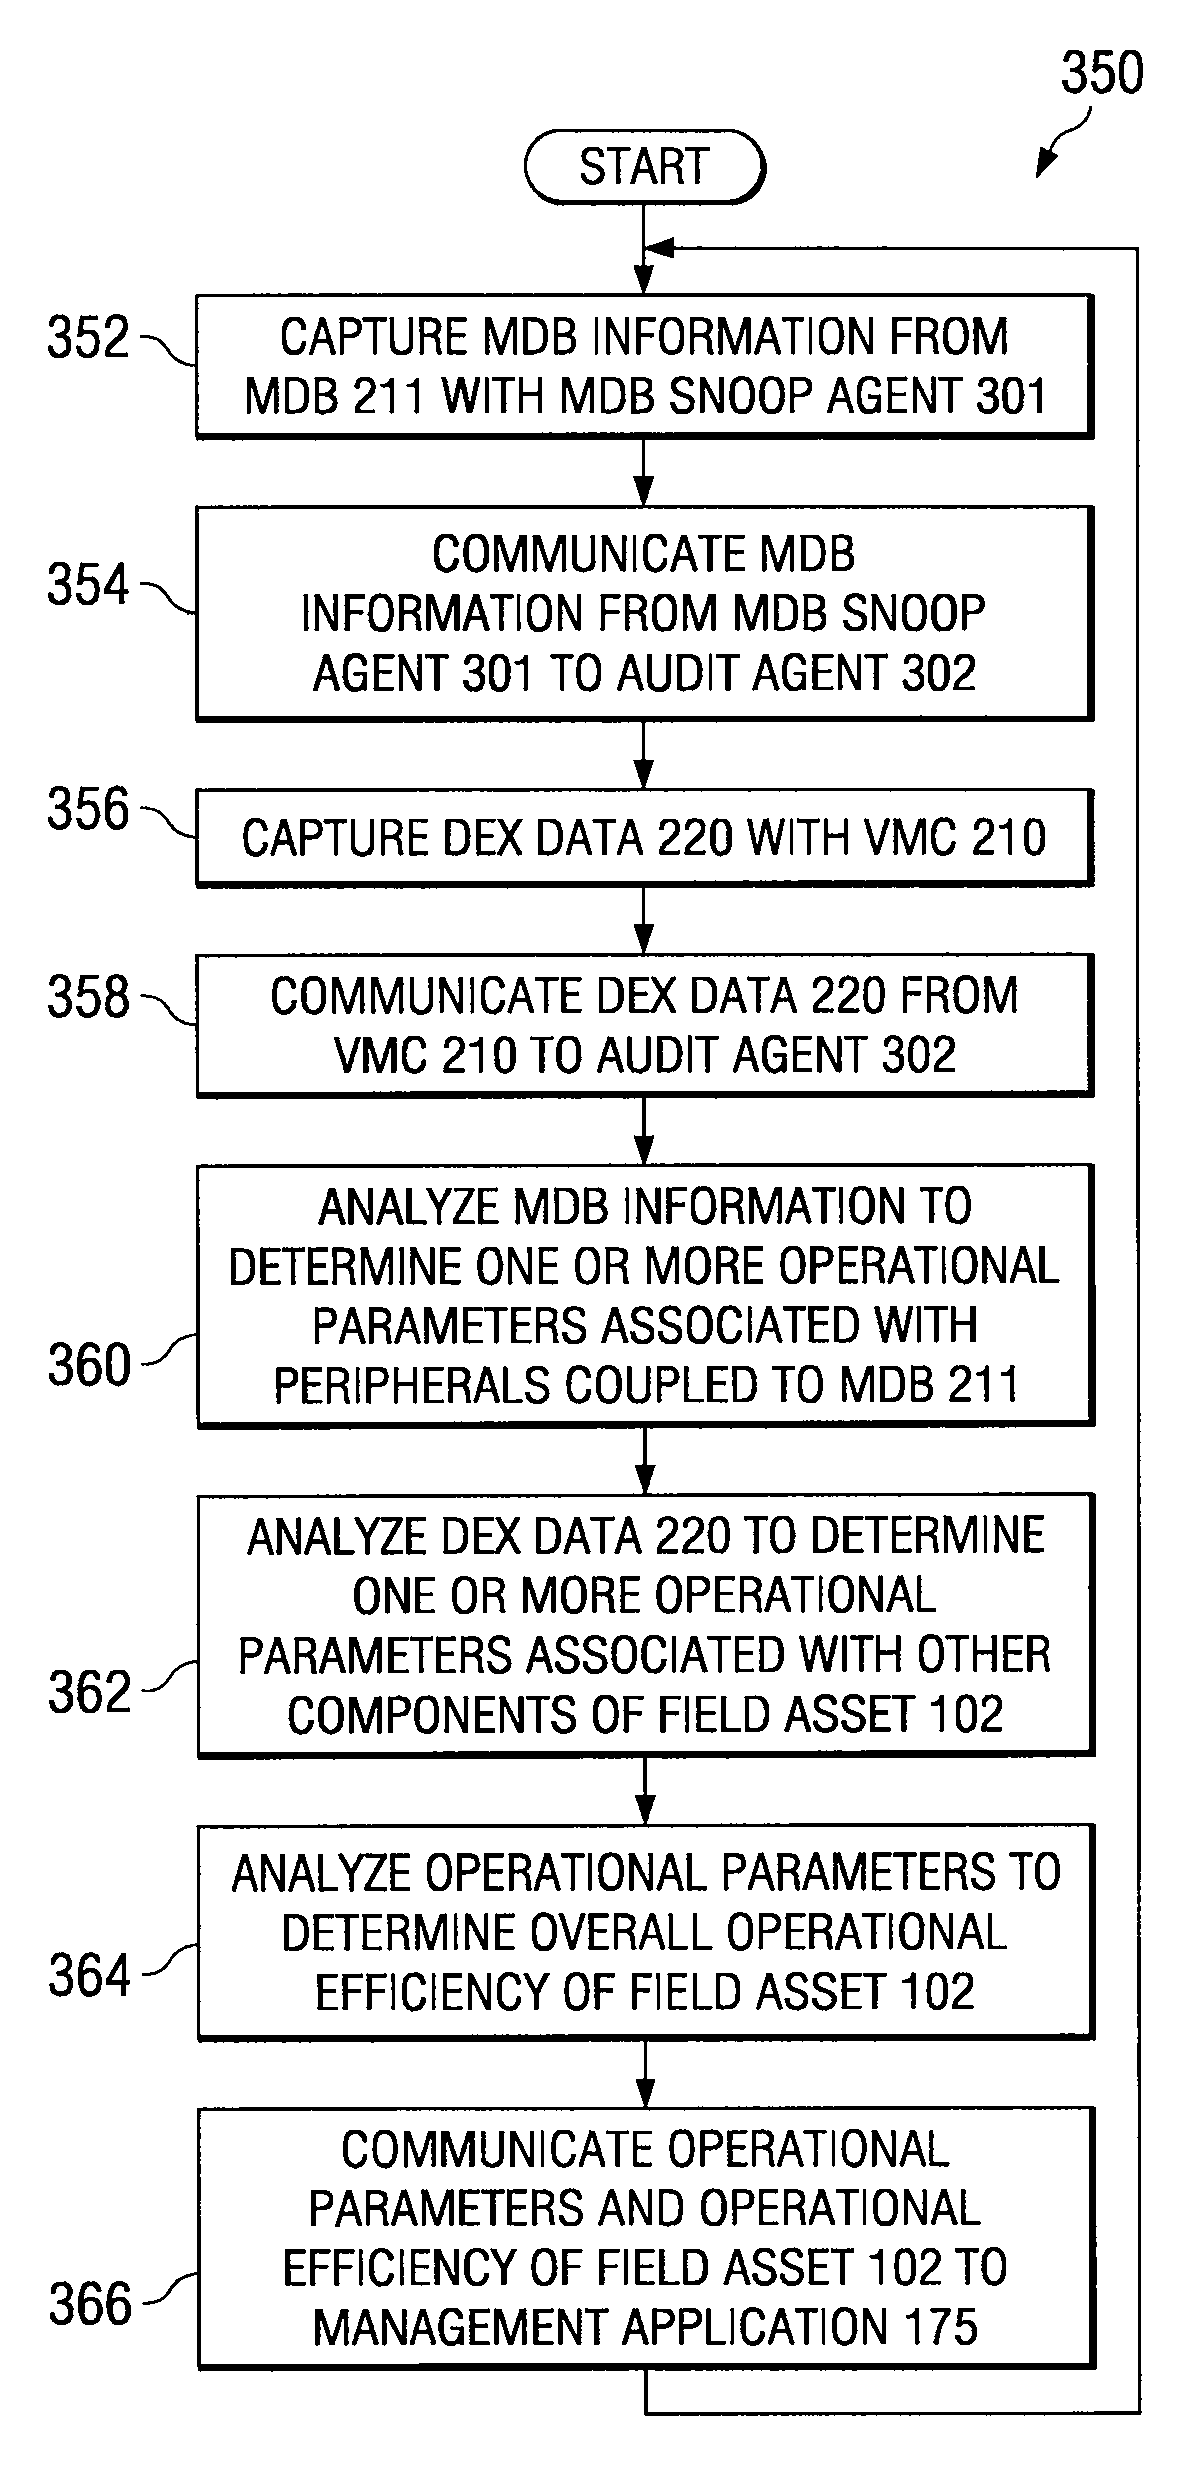 Systems and Methods for Monitoring Performance of Field Assets